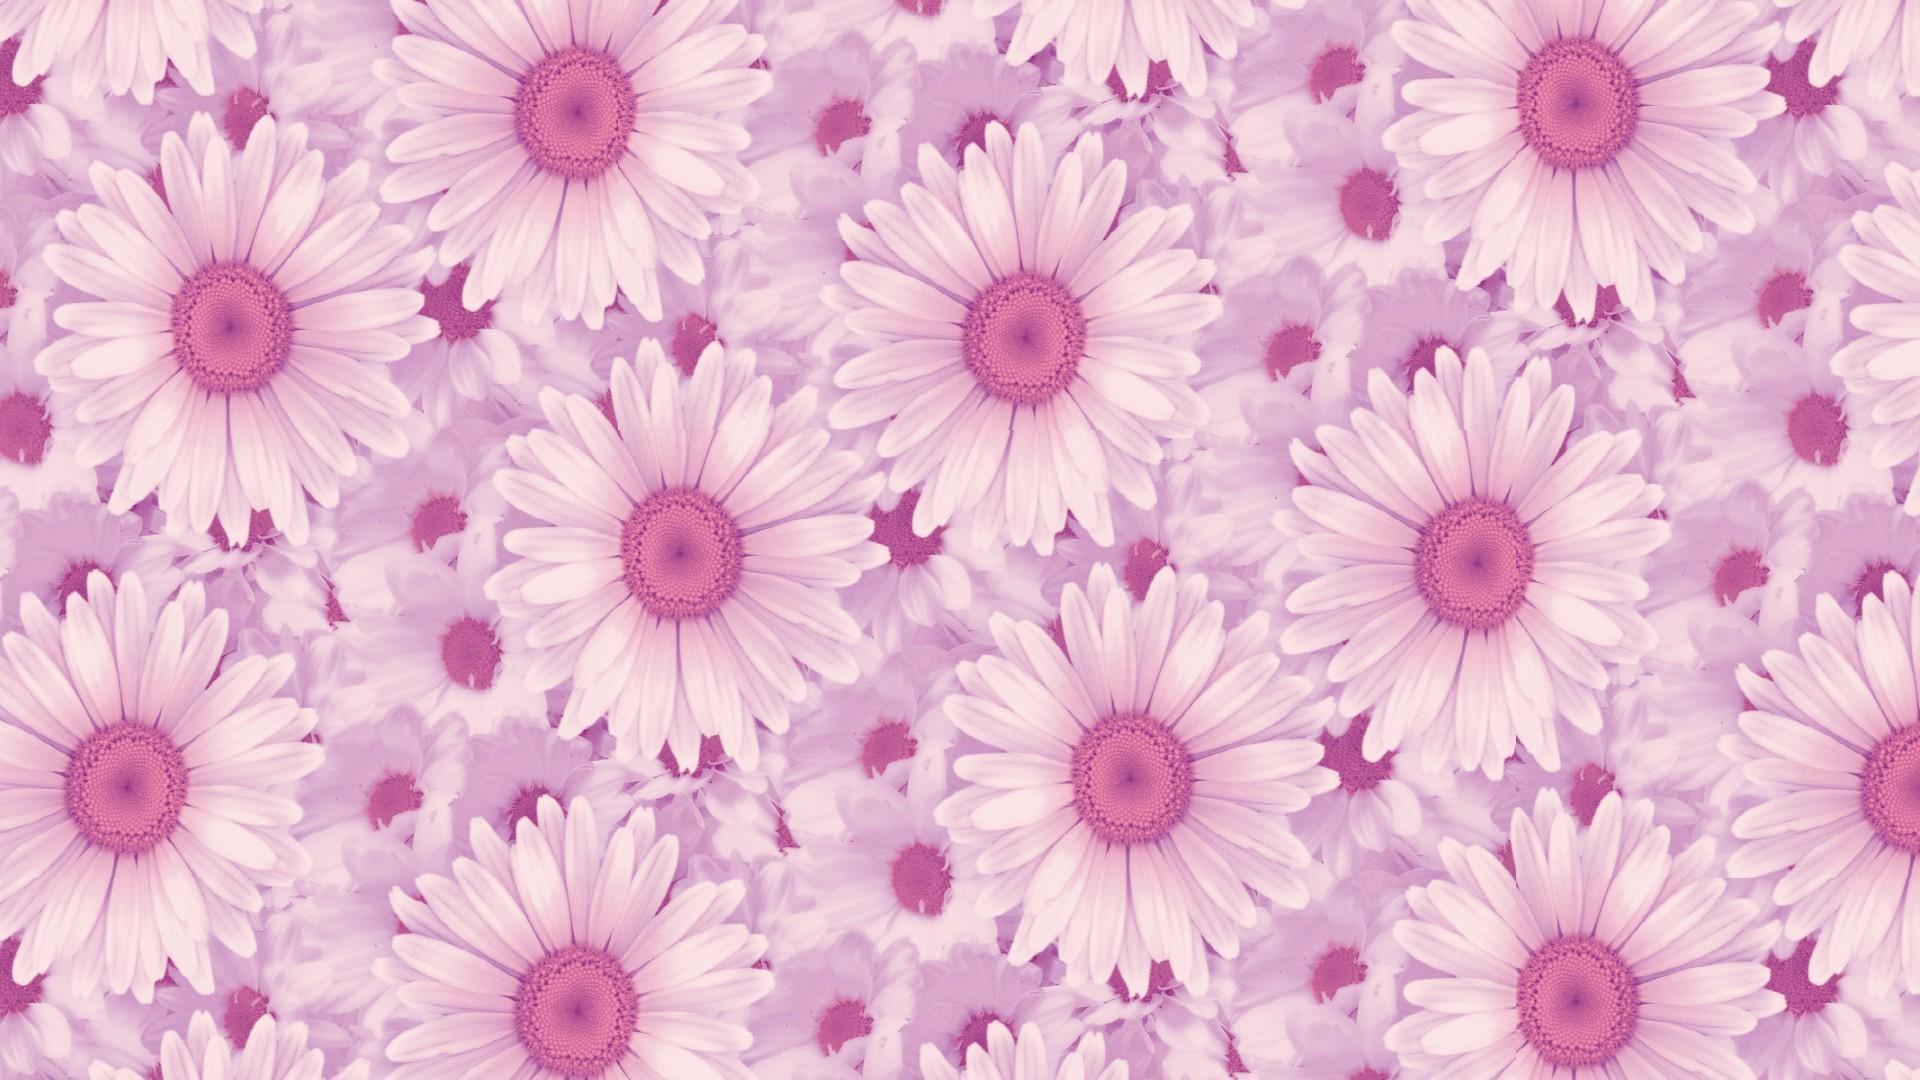 Pink Daisy Background wallpaper